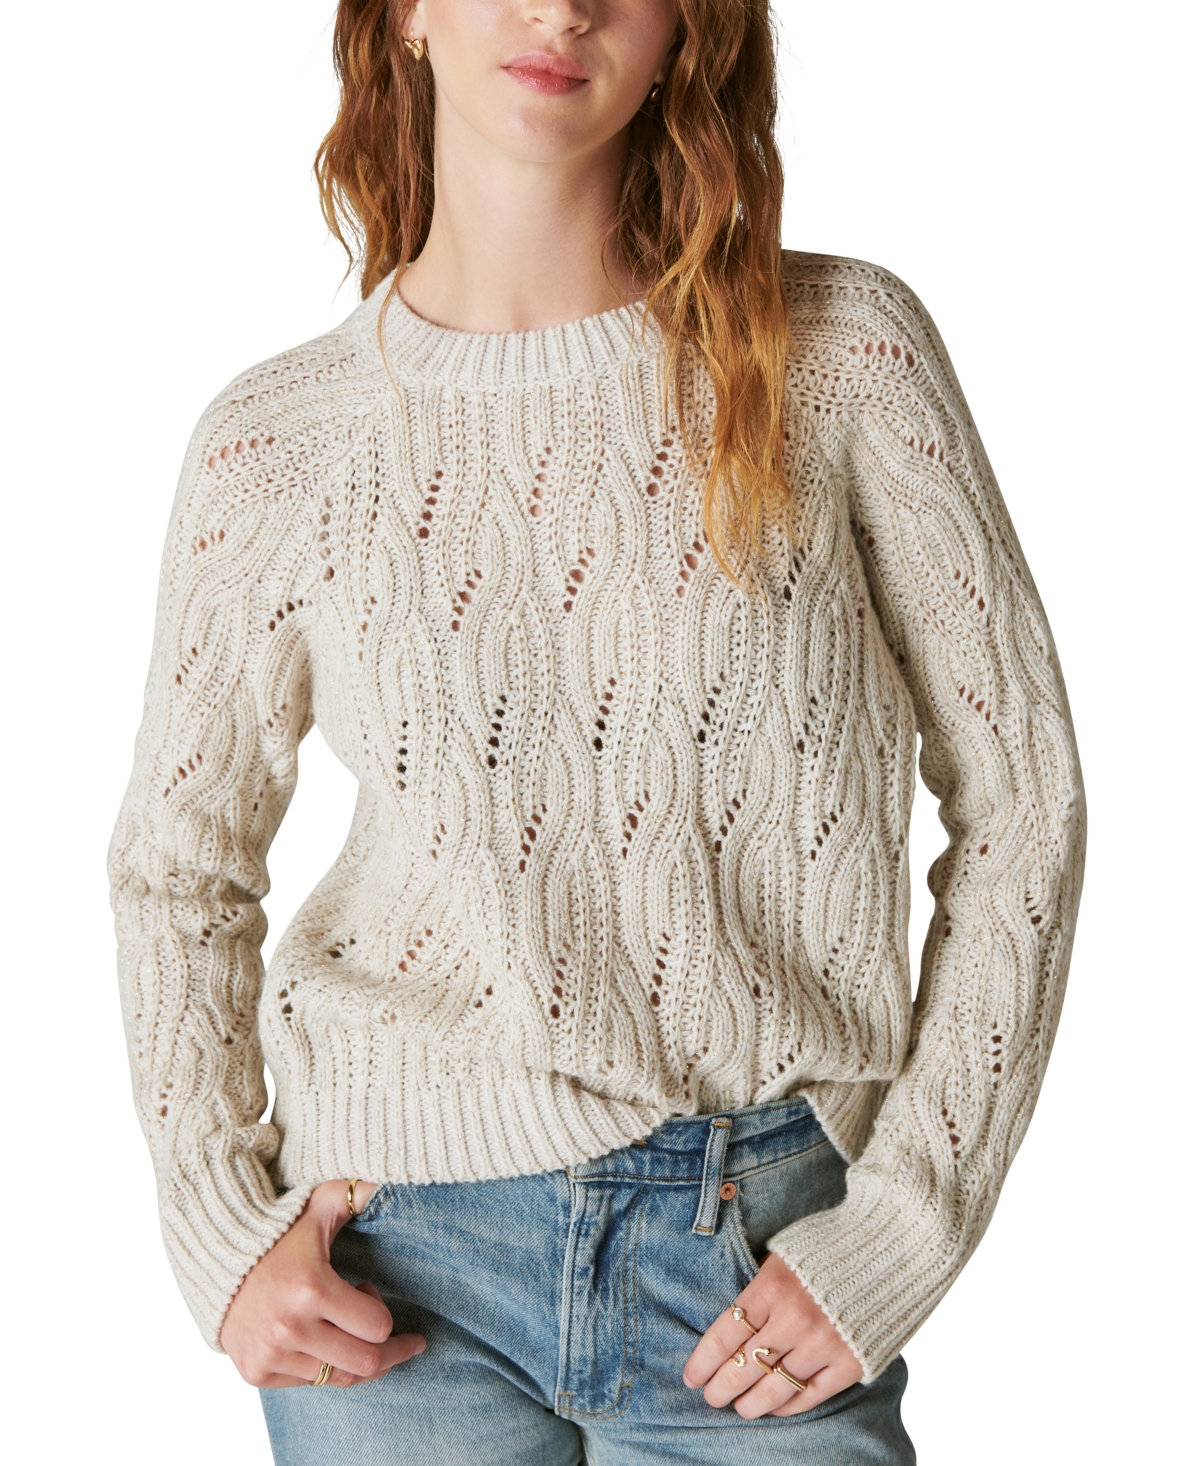 LUCKY BRAND WOMEN'S SHINE CABLE KNIT CREWNECK SWEATER